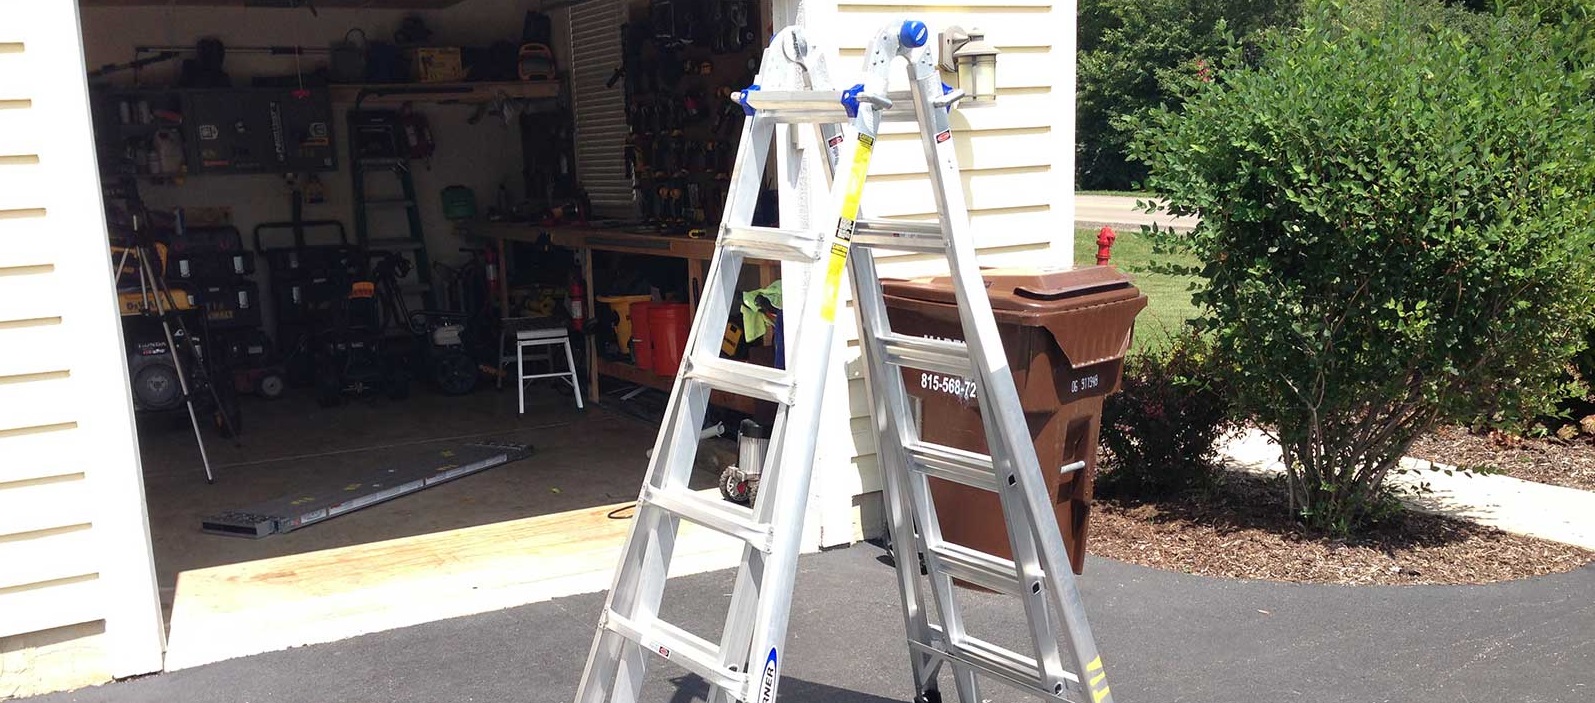 Better extension. Werner Multi Ladder Reviews. Лестница Moveable Ladder 15m with Wheels. Extension Ladder. Werner Ladder 6 foot.